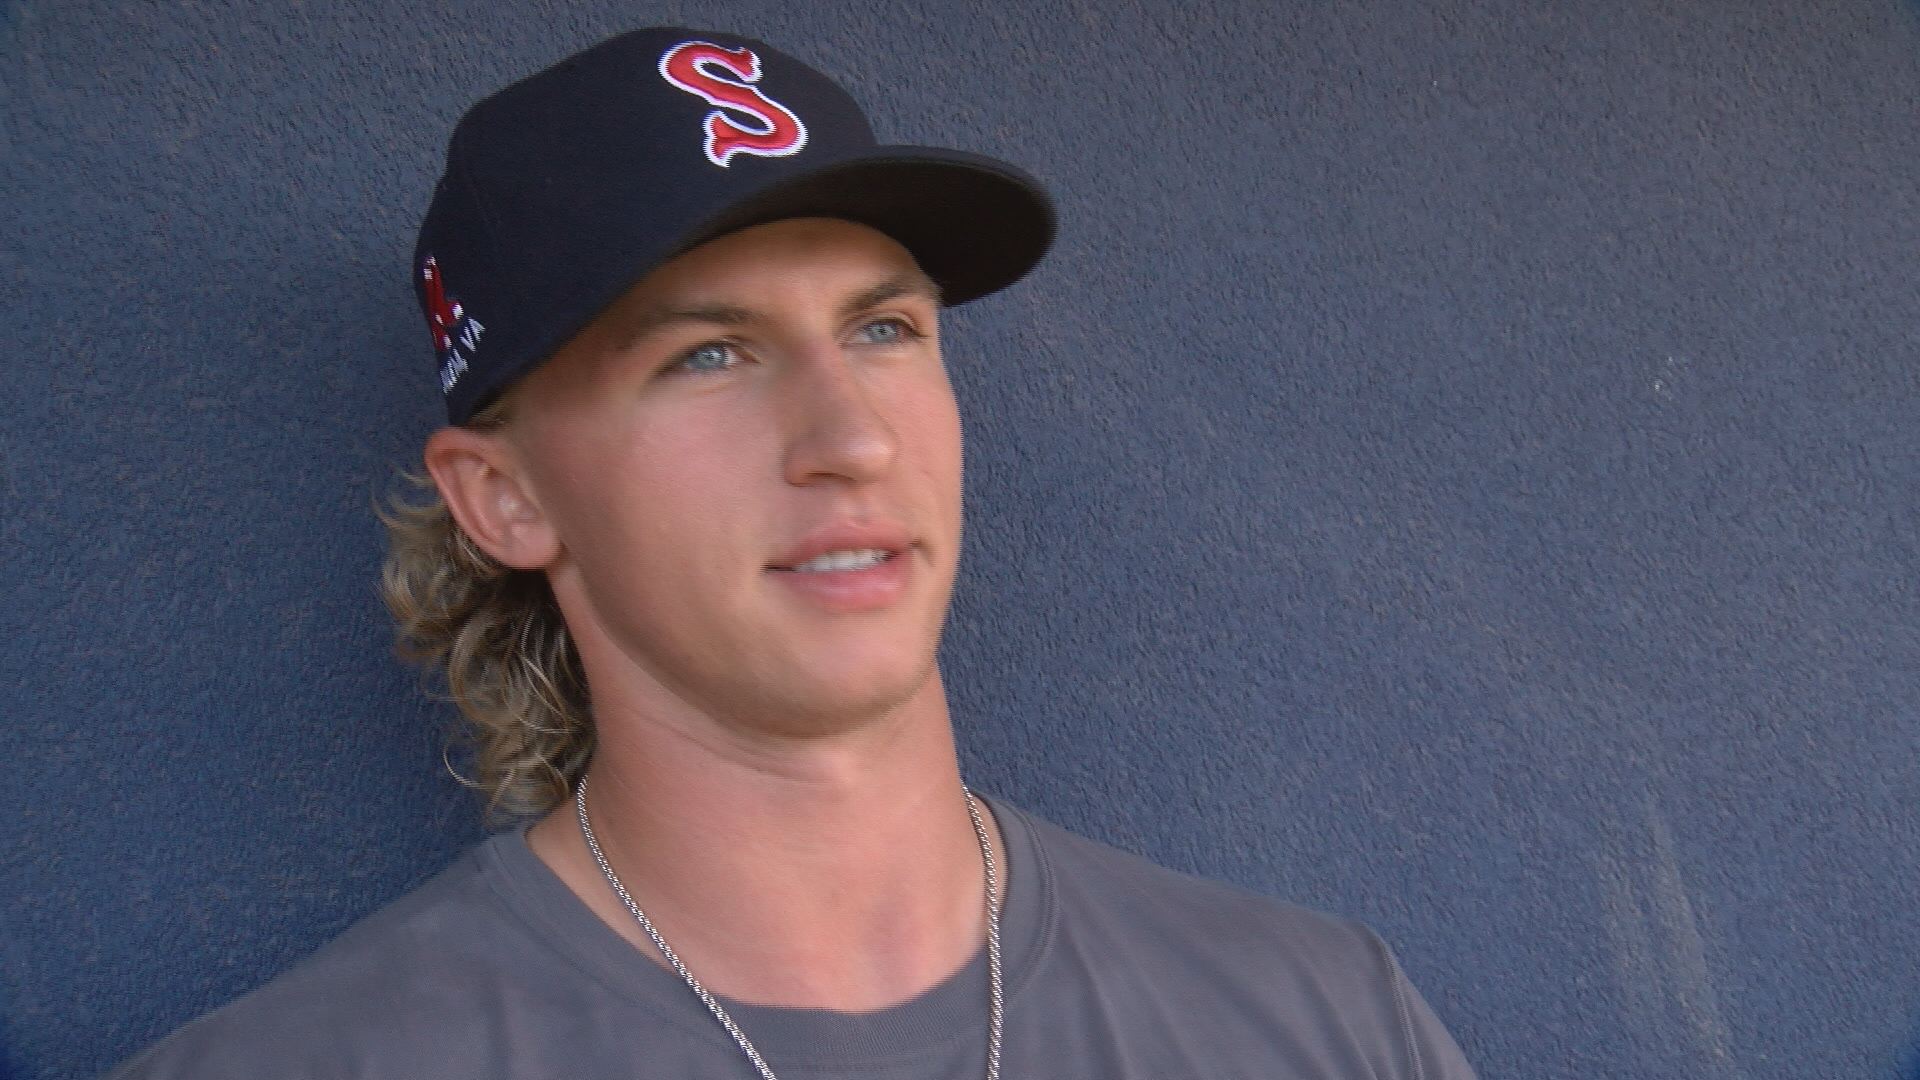 Mount Pleasant's Michael Kopech Drafted 33rd Overall by the Boston